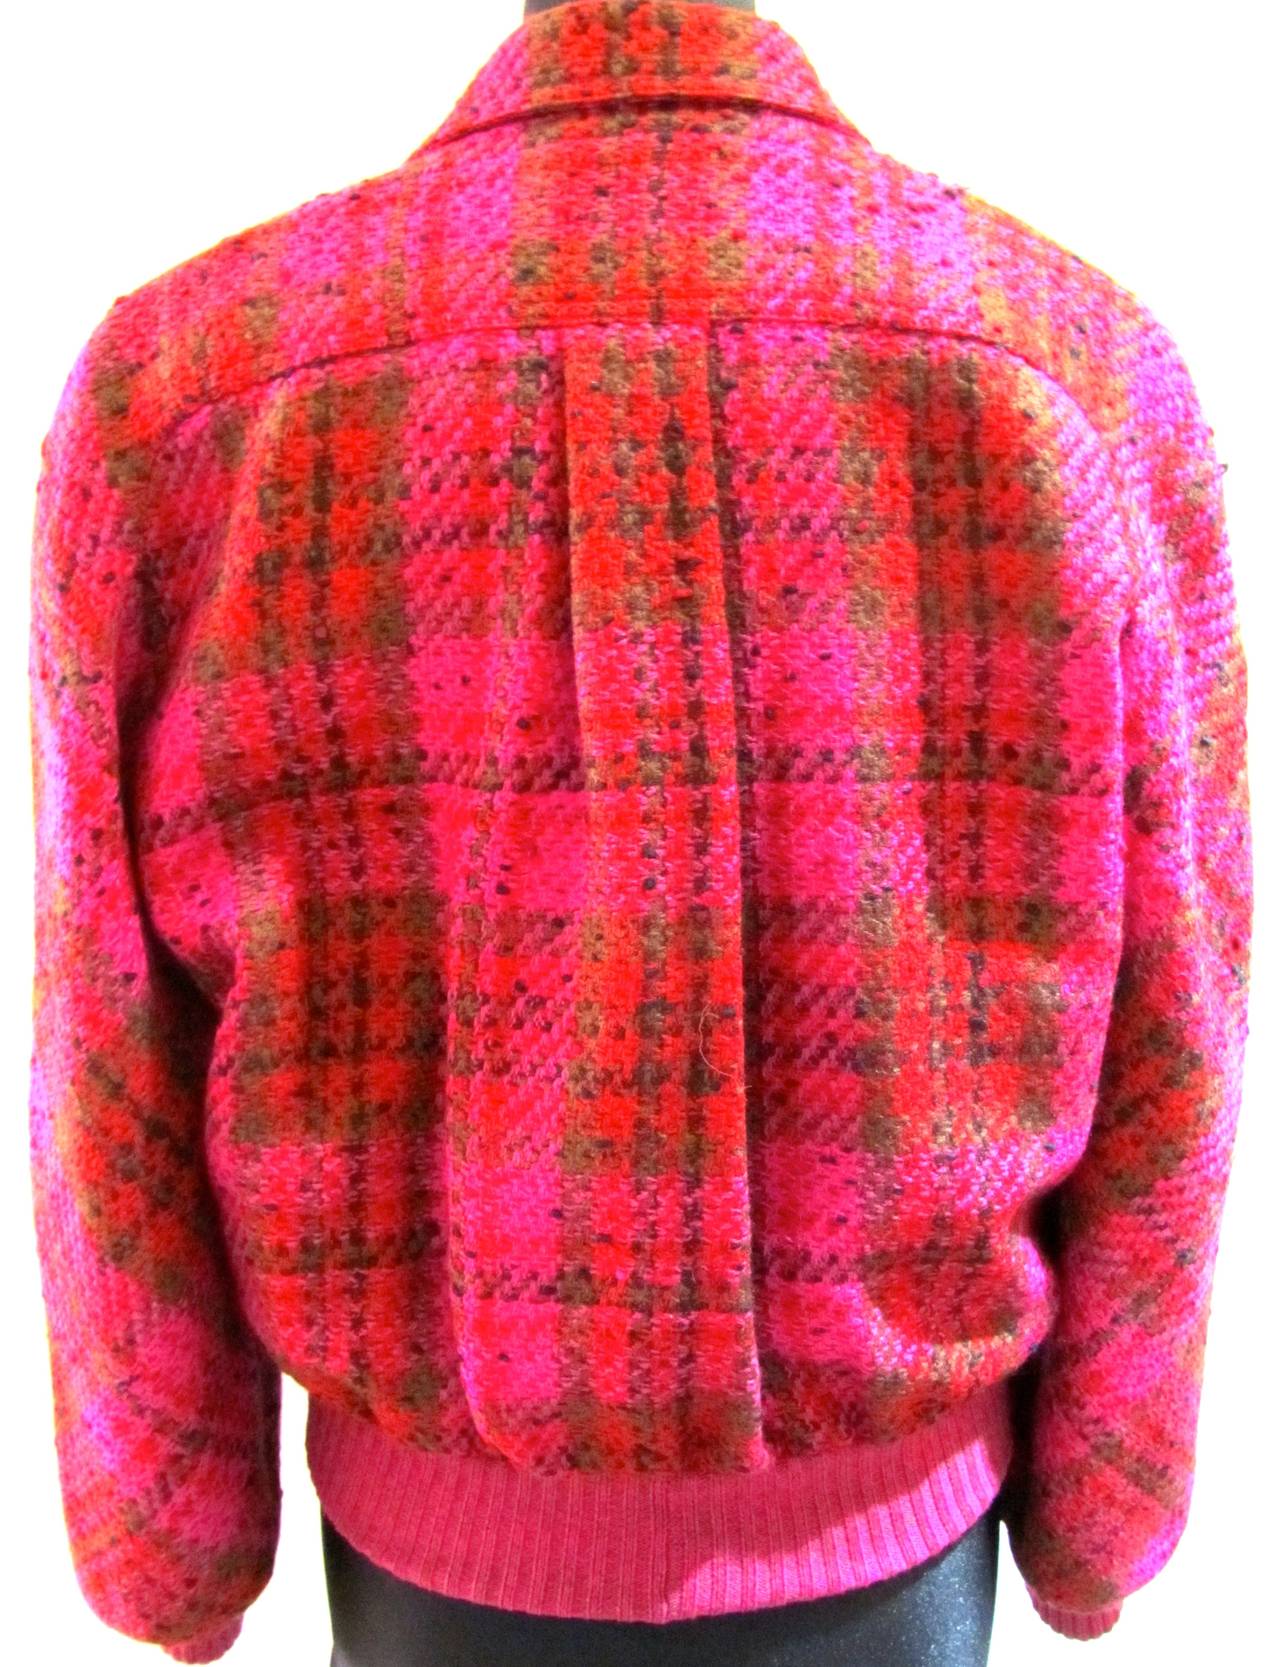 Valentino, Miss V. Boucle wool double breasted bomber jacket. Plaid fabric has colors of fuchsia, red, green, and black. Size 40. 1980's. 

Remarkable piece that is in excellent condition.